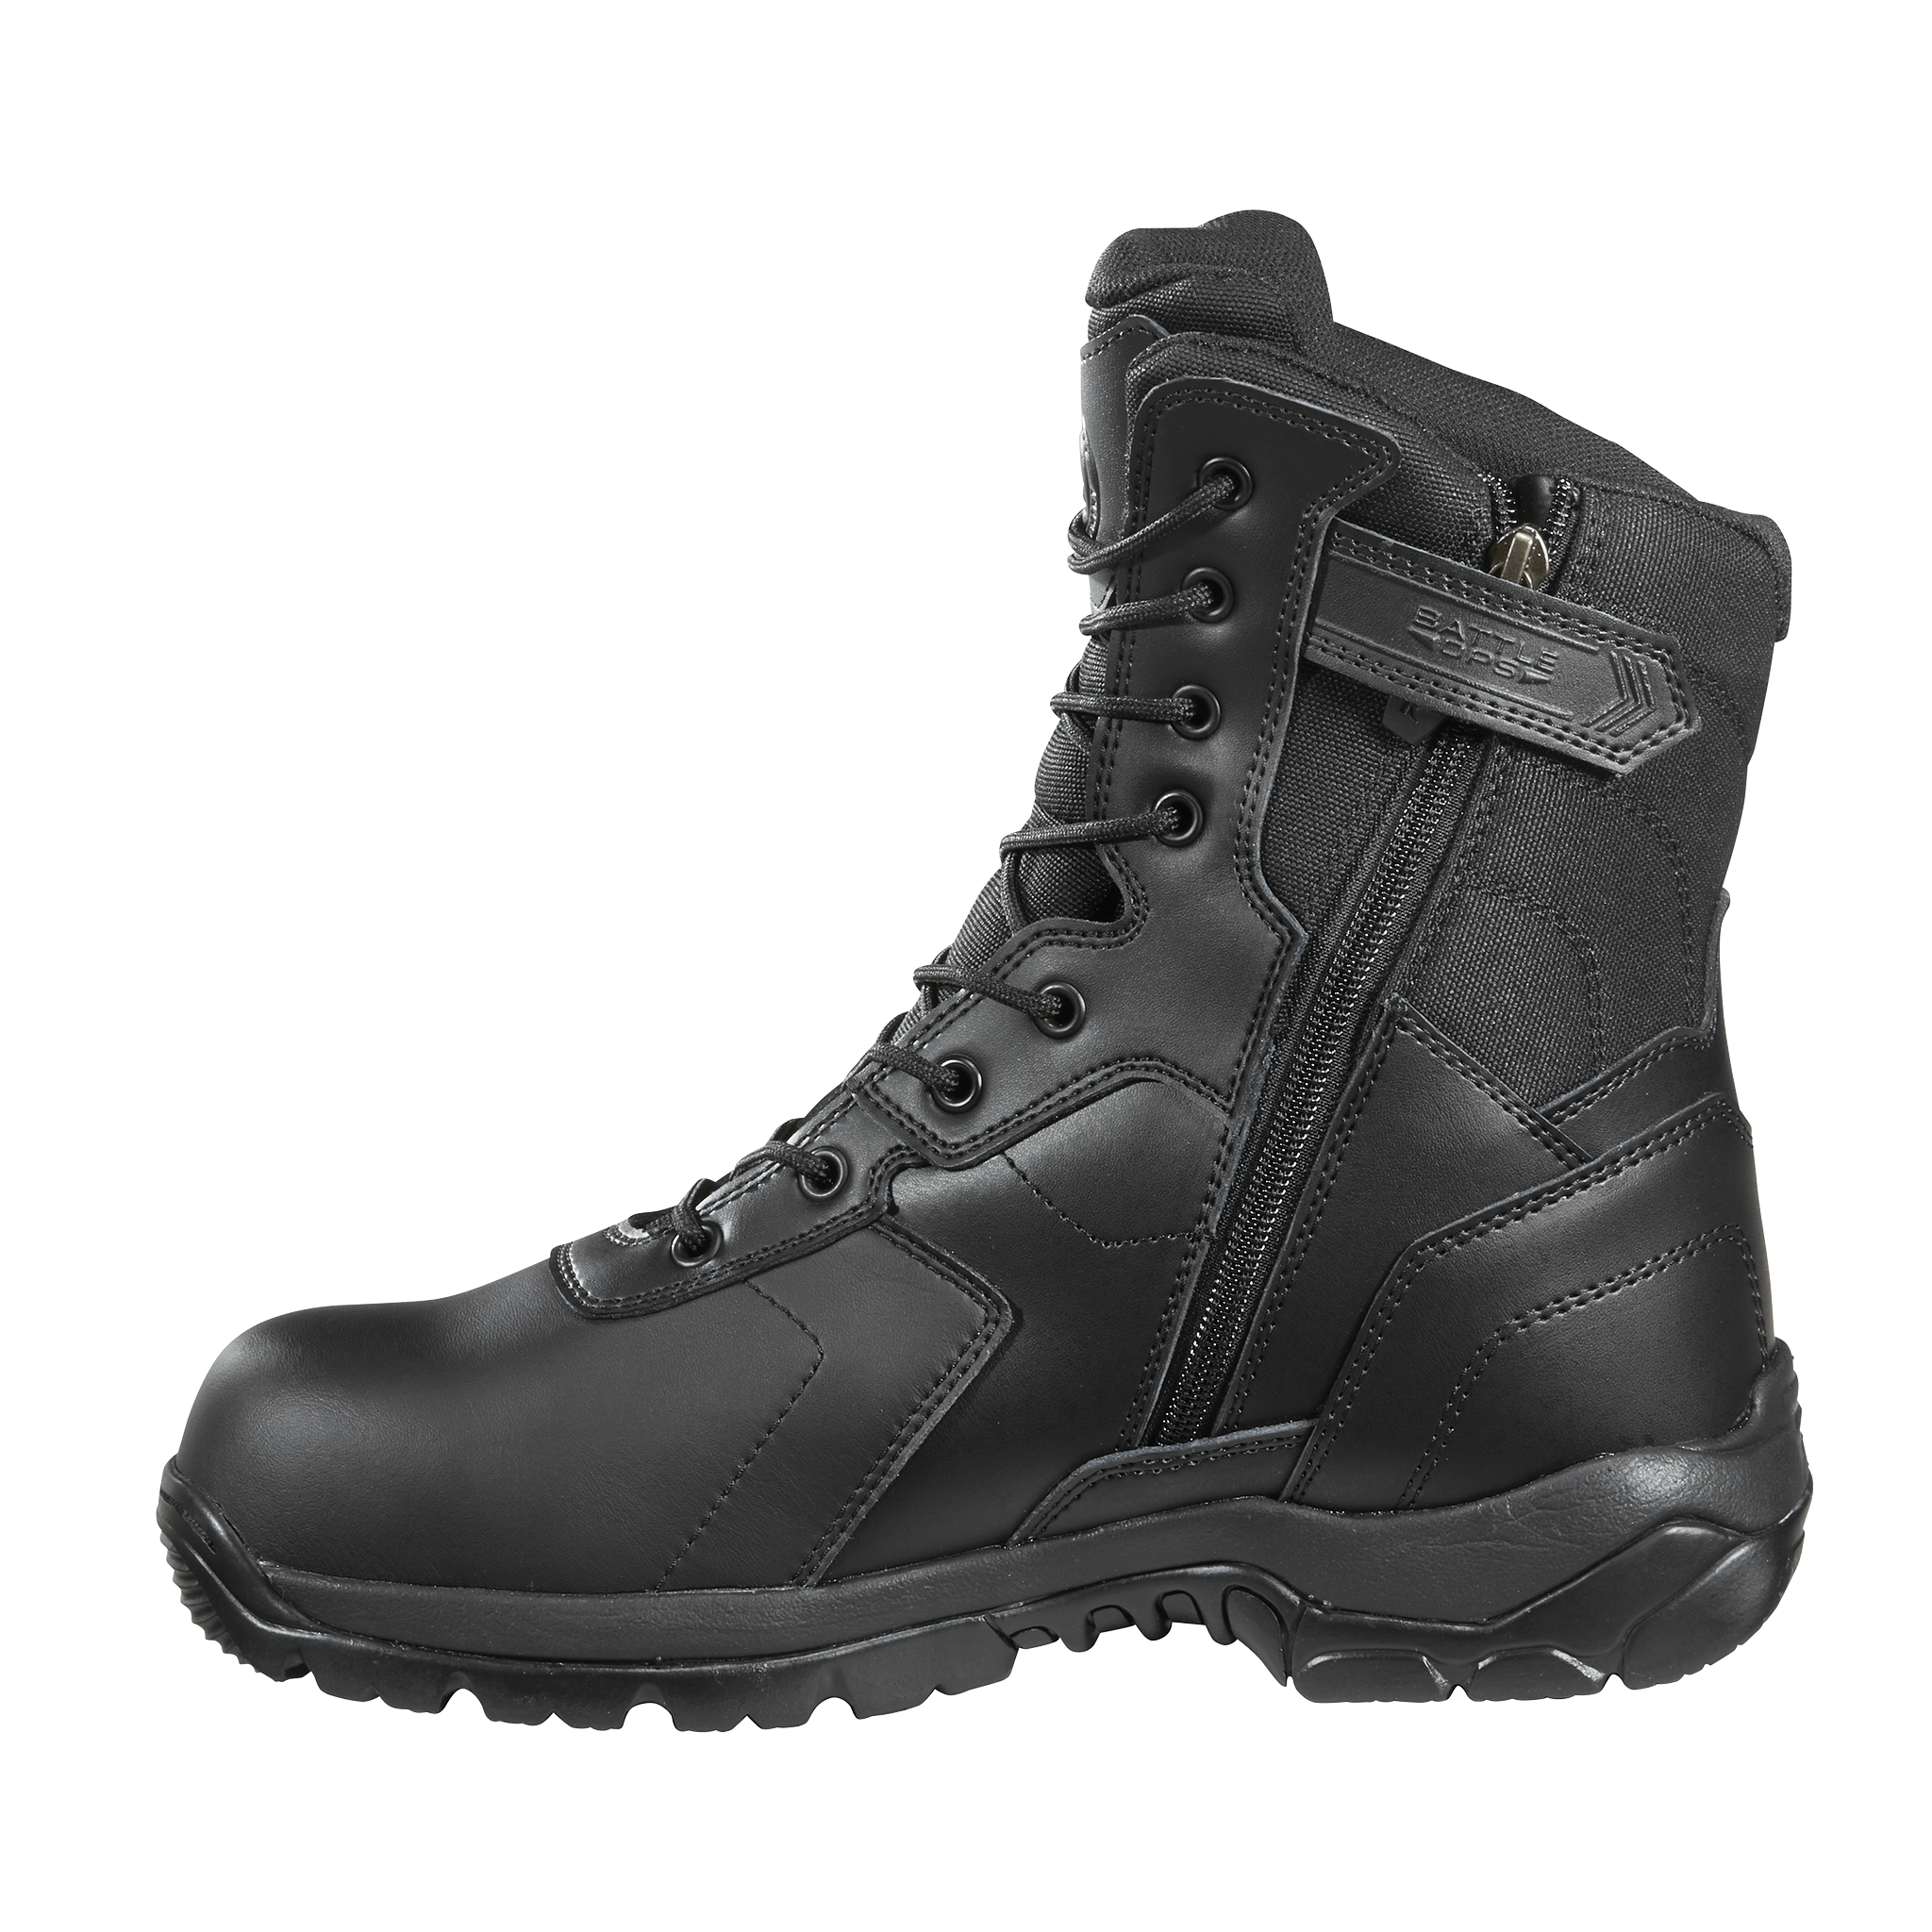 8-inch Waterproof Tactical Boot - Side Zip Non Safety Toe – Black